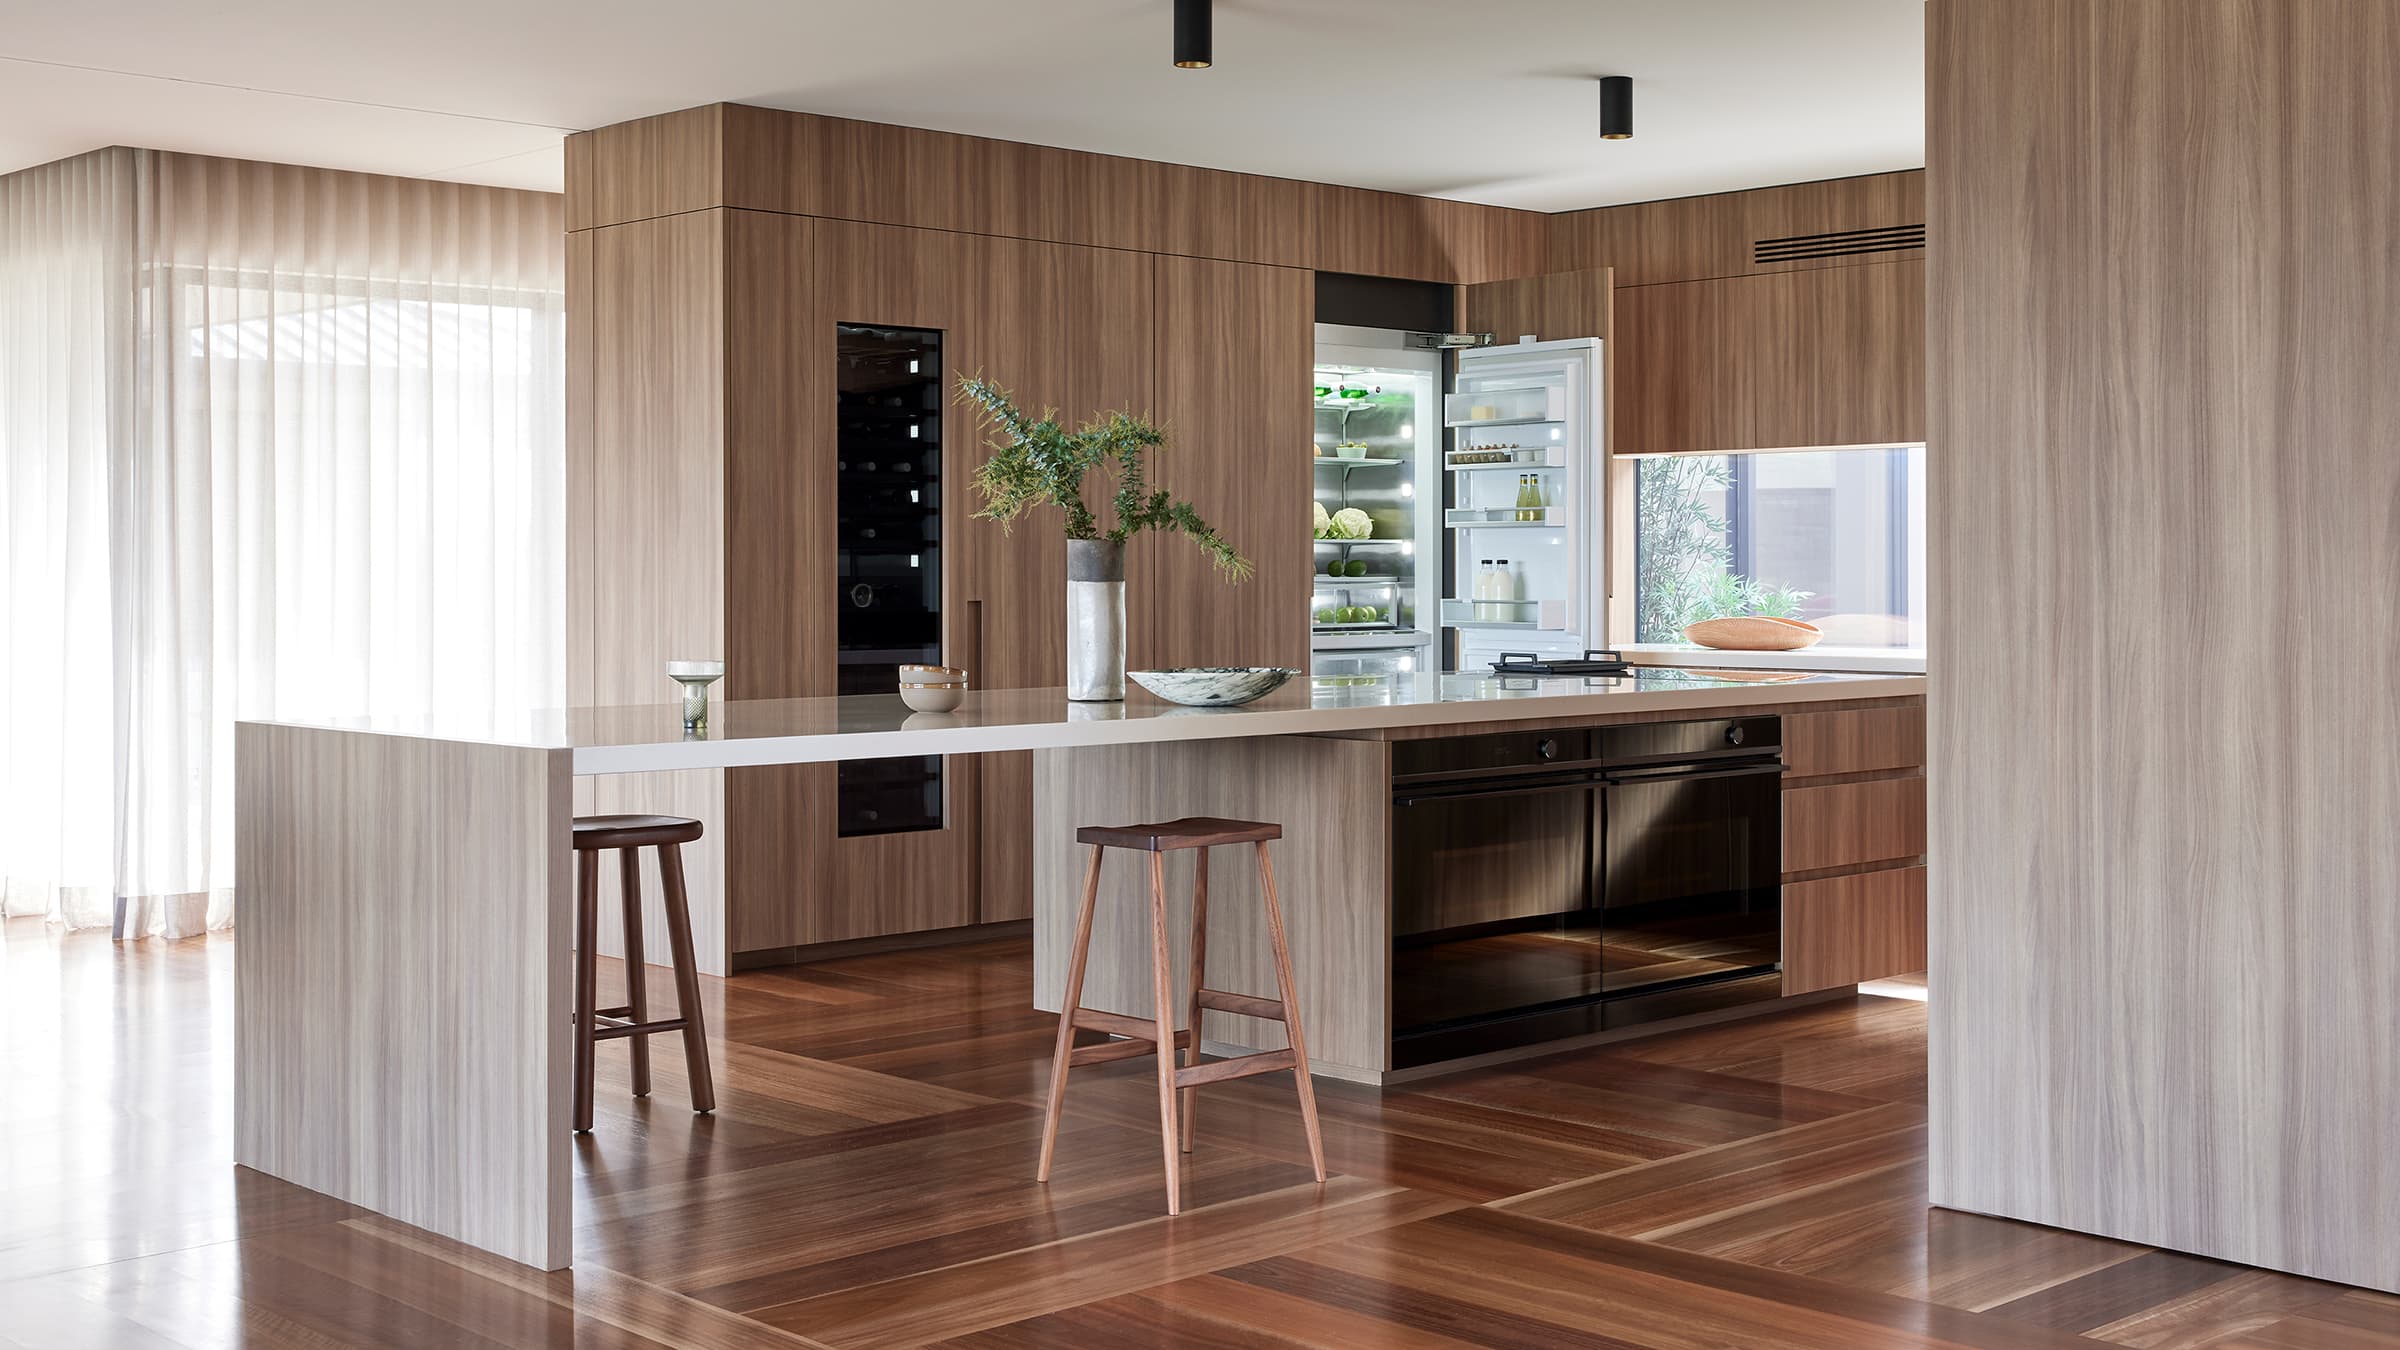 Shot of the kitchen, showcasing the Minimal Oven and Integrated Column Refrigerator with the door open.